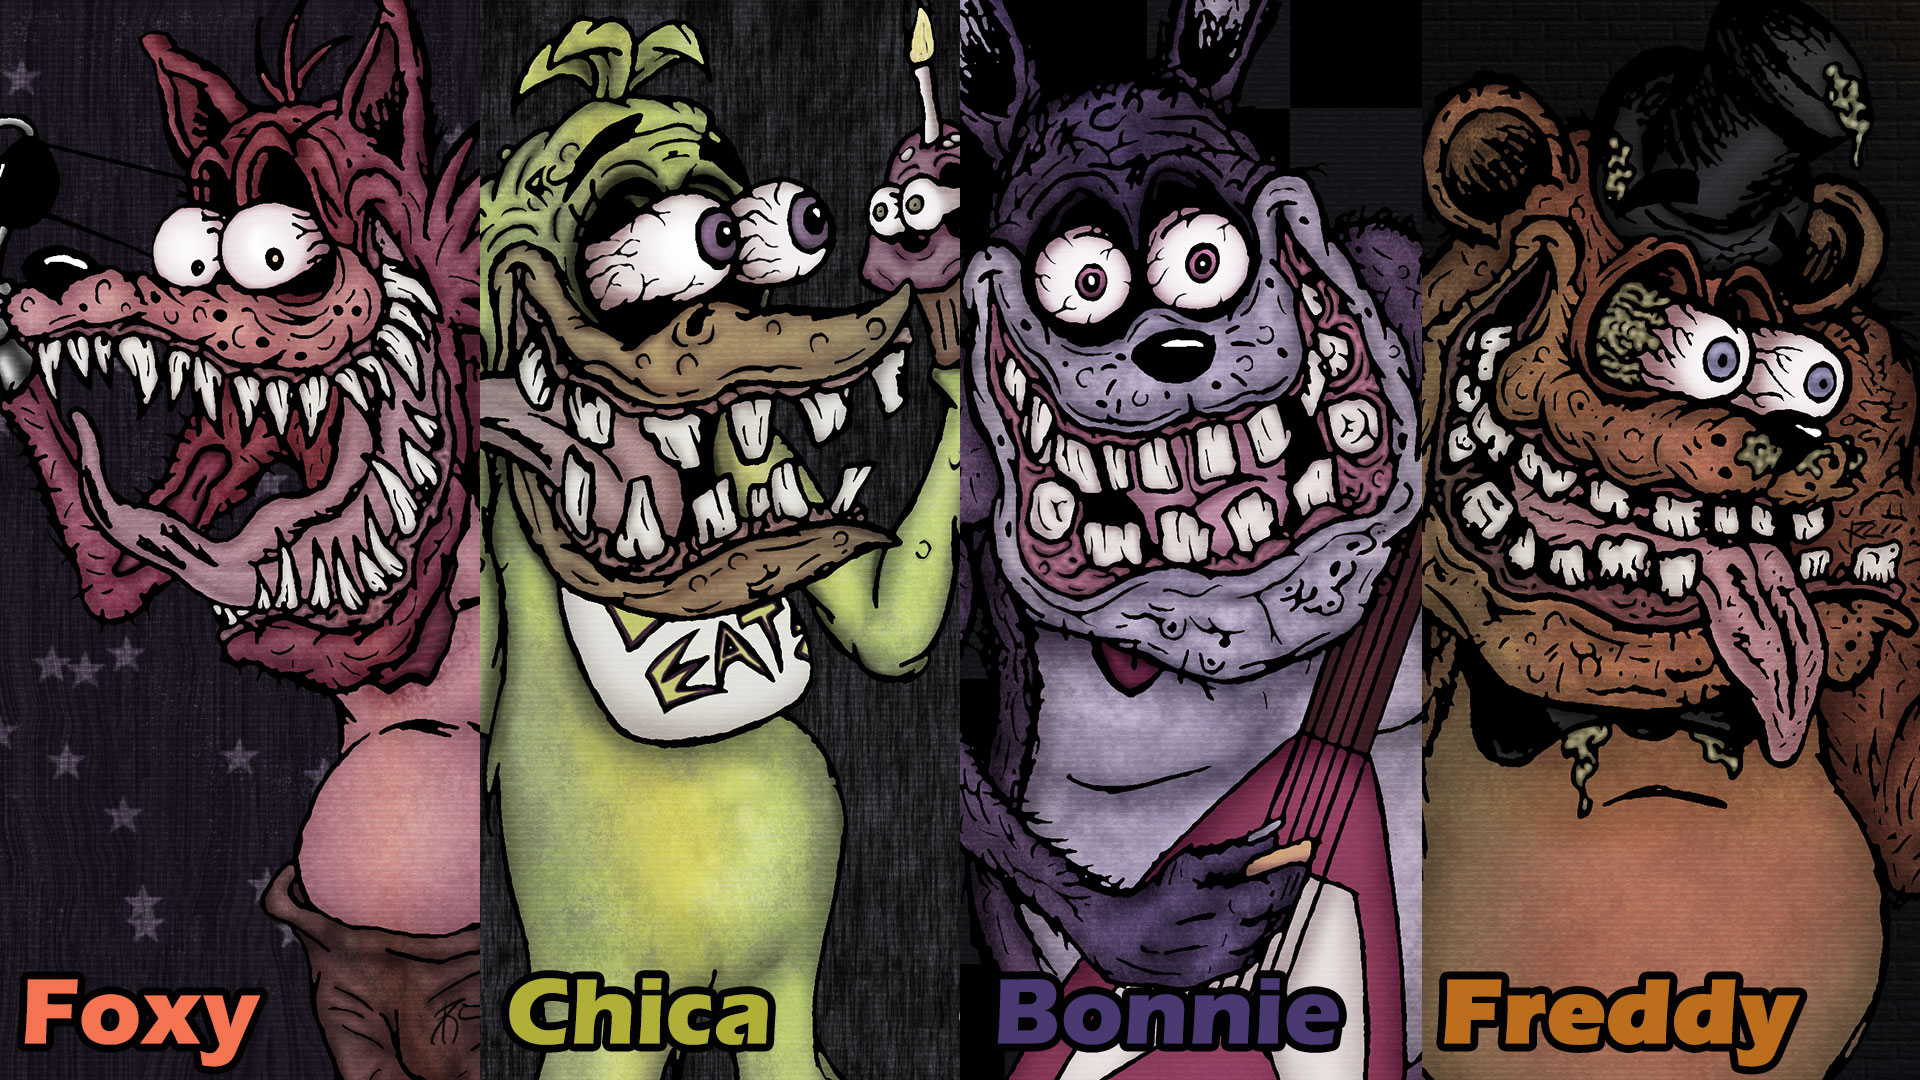 Five Nights At Freddy Ed Roth Style Wallpaper By Sestrennk On